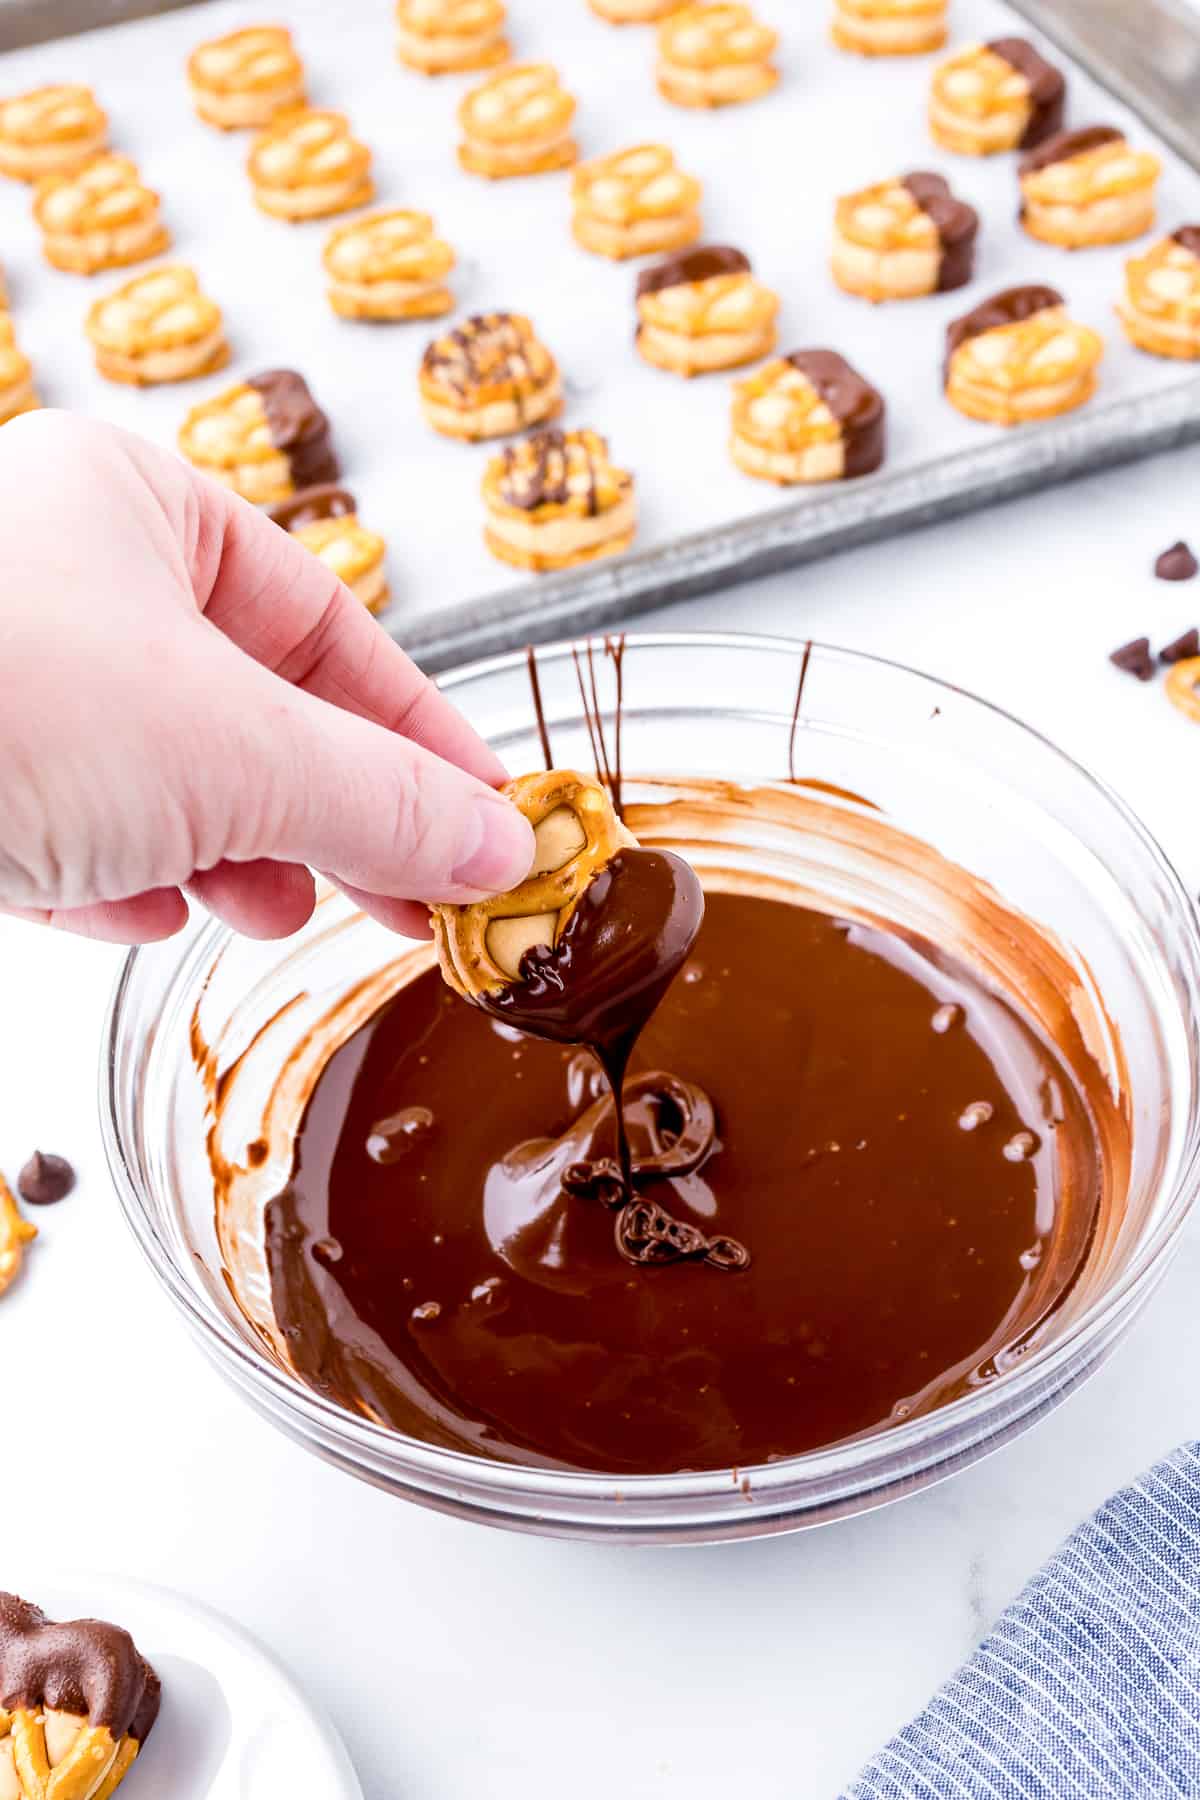 Peanut butter pretzel bite being dipped in chocolate in a bowl with more on a sheetpan in the background.